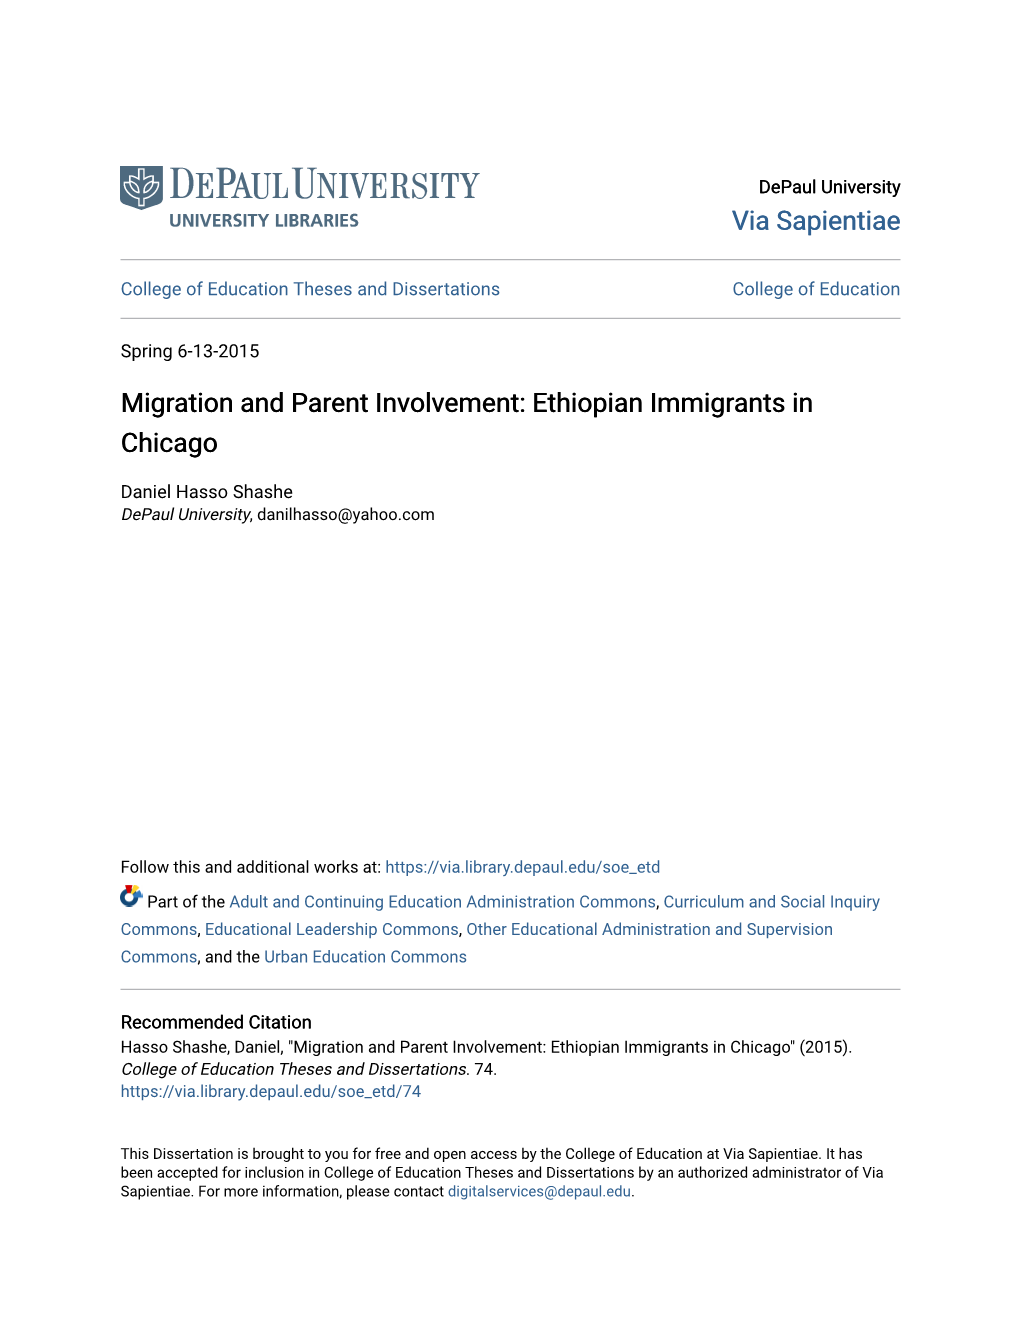 Migration and Parent Involvement: Ethiopian Immigrants in Chicago